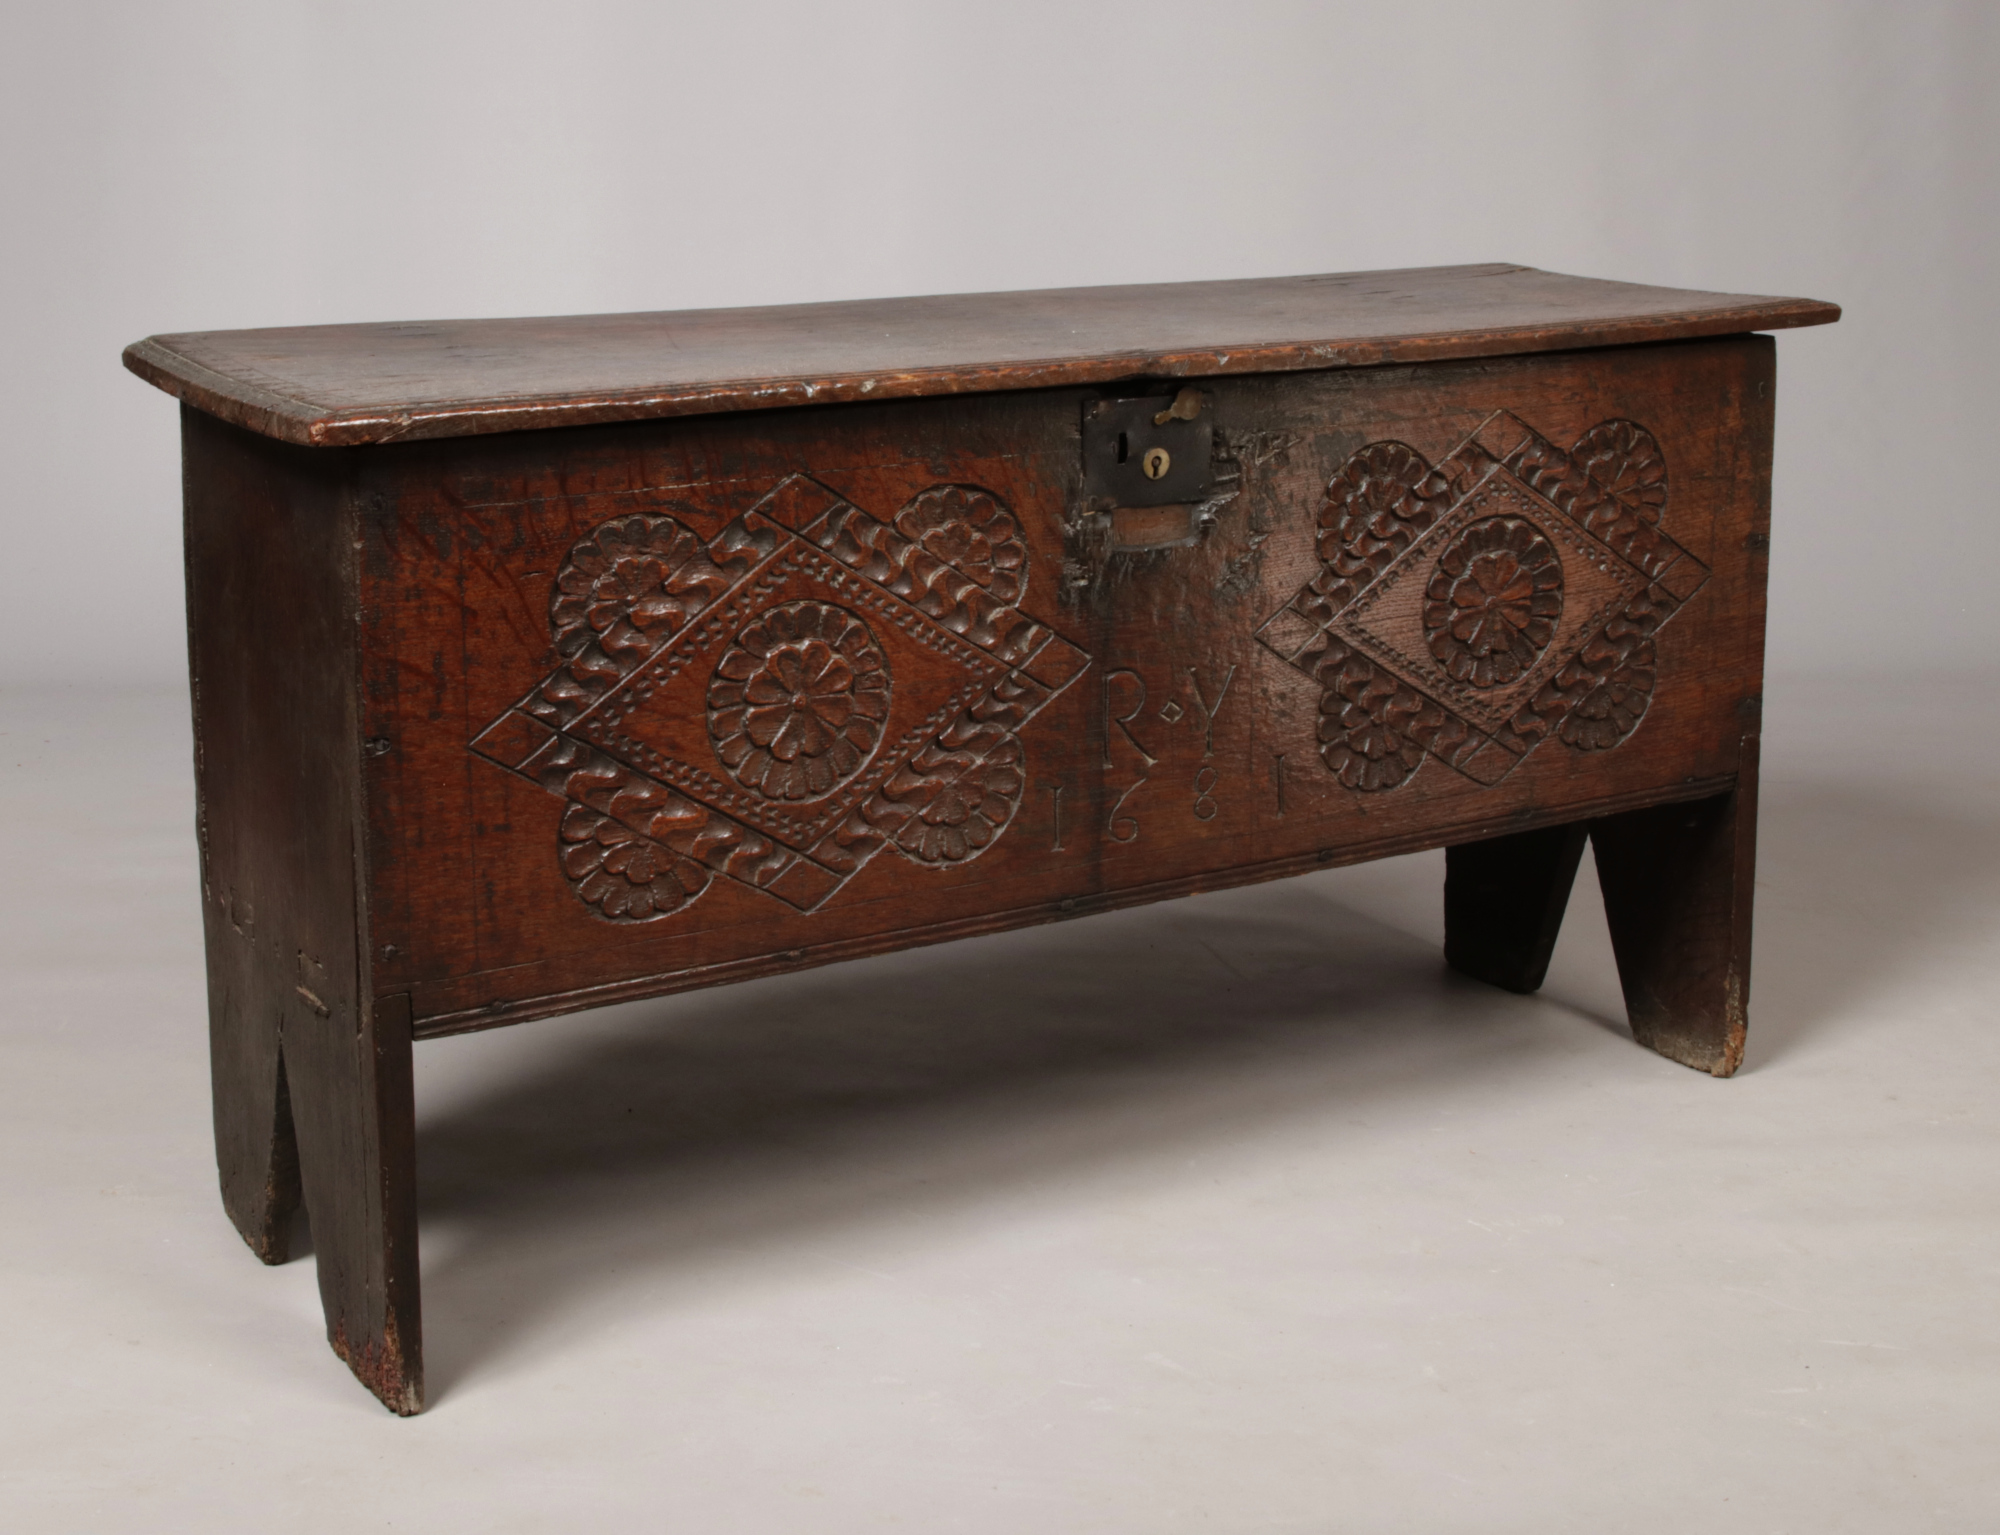 A 17th century boarded oak coffer. With exposed tenons to the side planks, carved medallions to